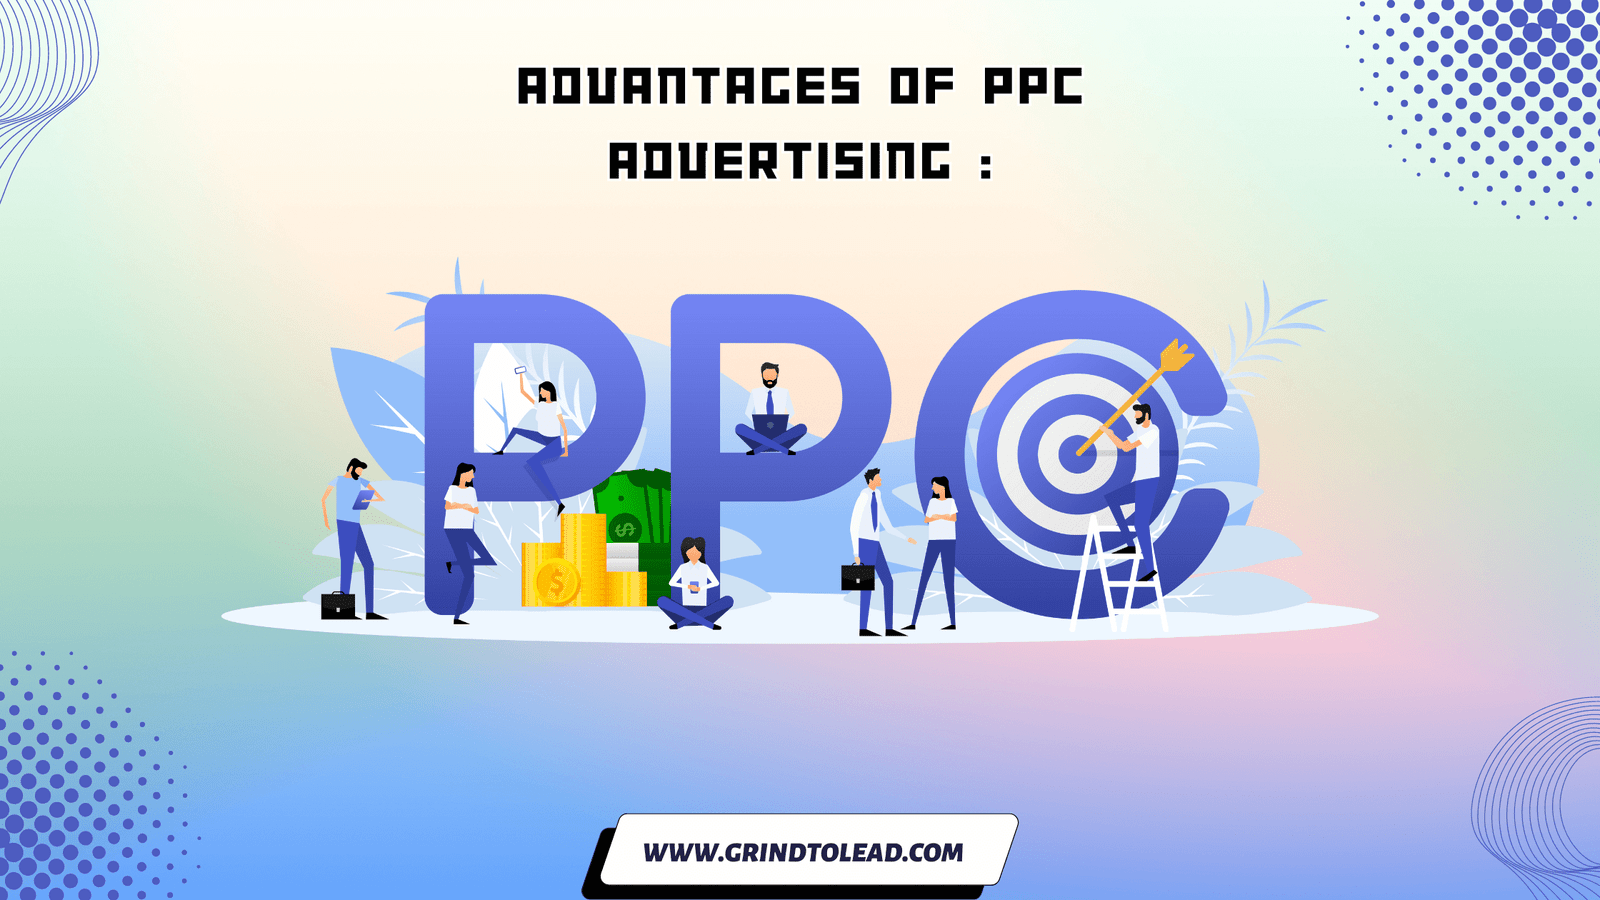 Advantages of PPC Advertising